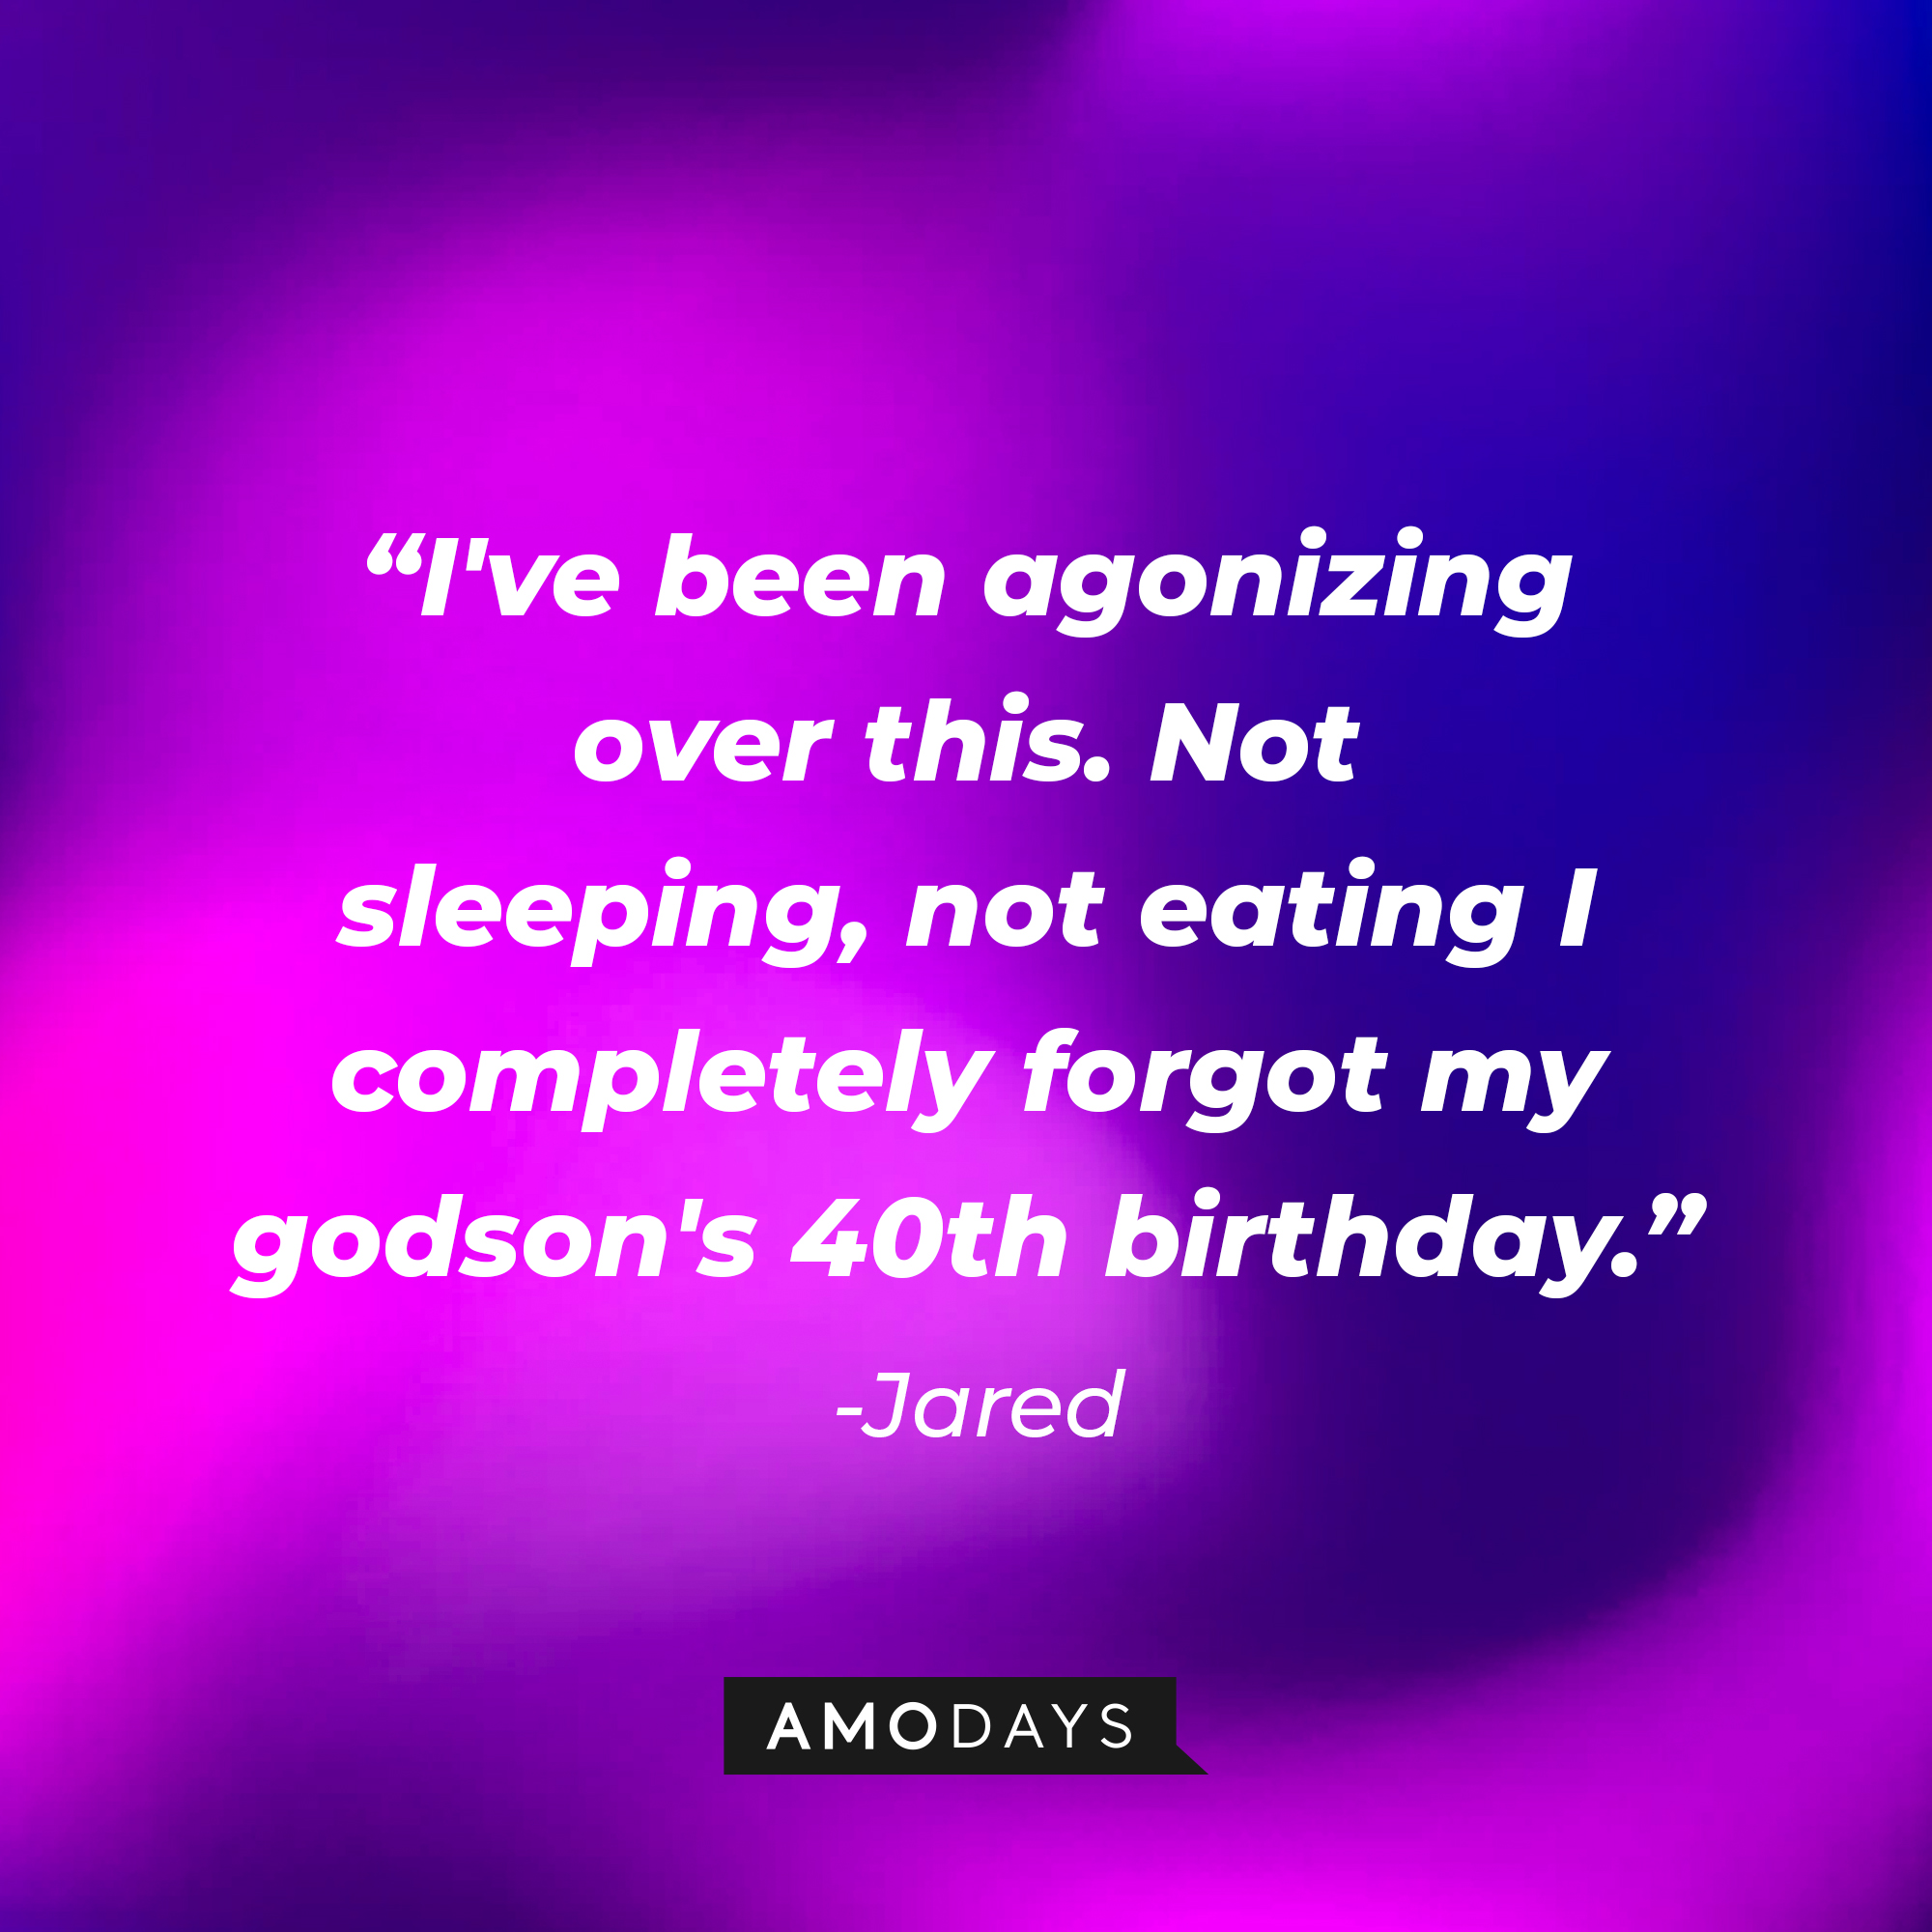 Jared's quote: “I've been agonizing over this. Not sleeping, not eating, I completely forgot my godson's 40th birthday.” | Source: Amodays